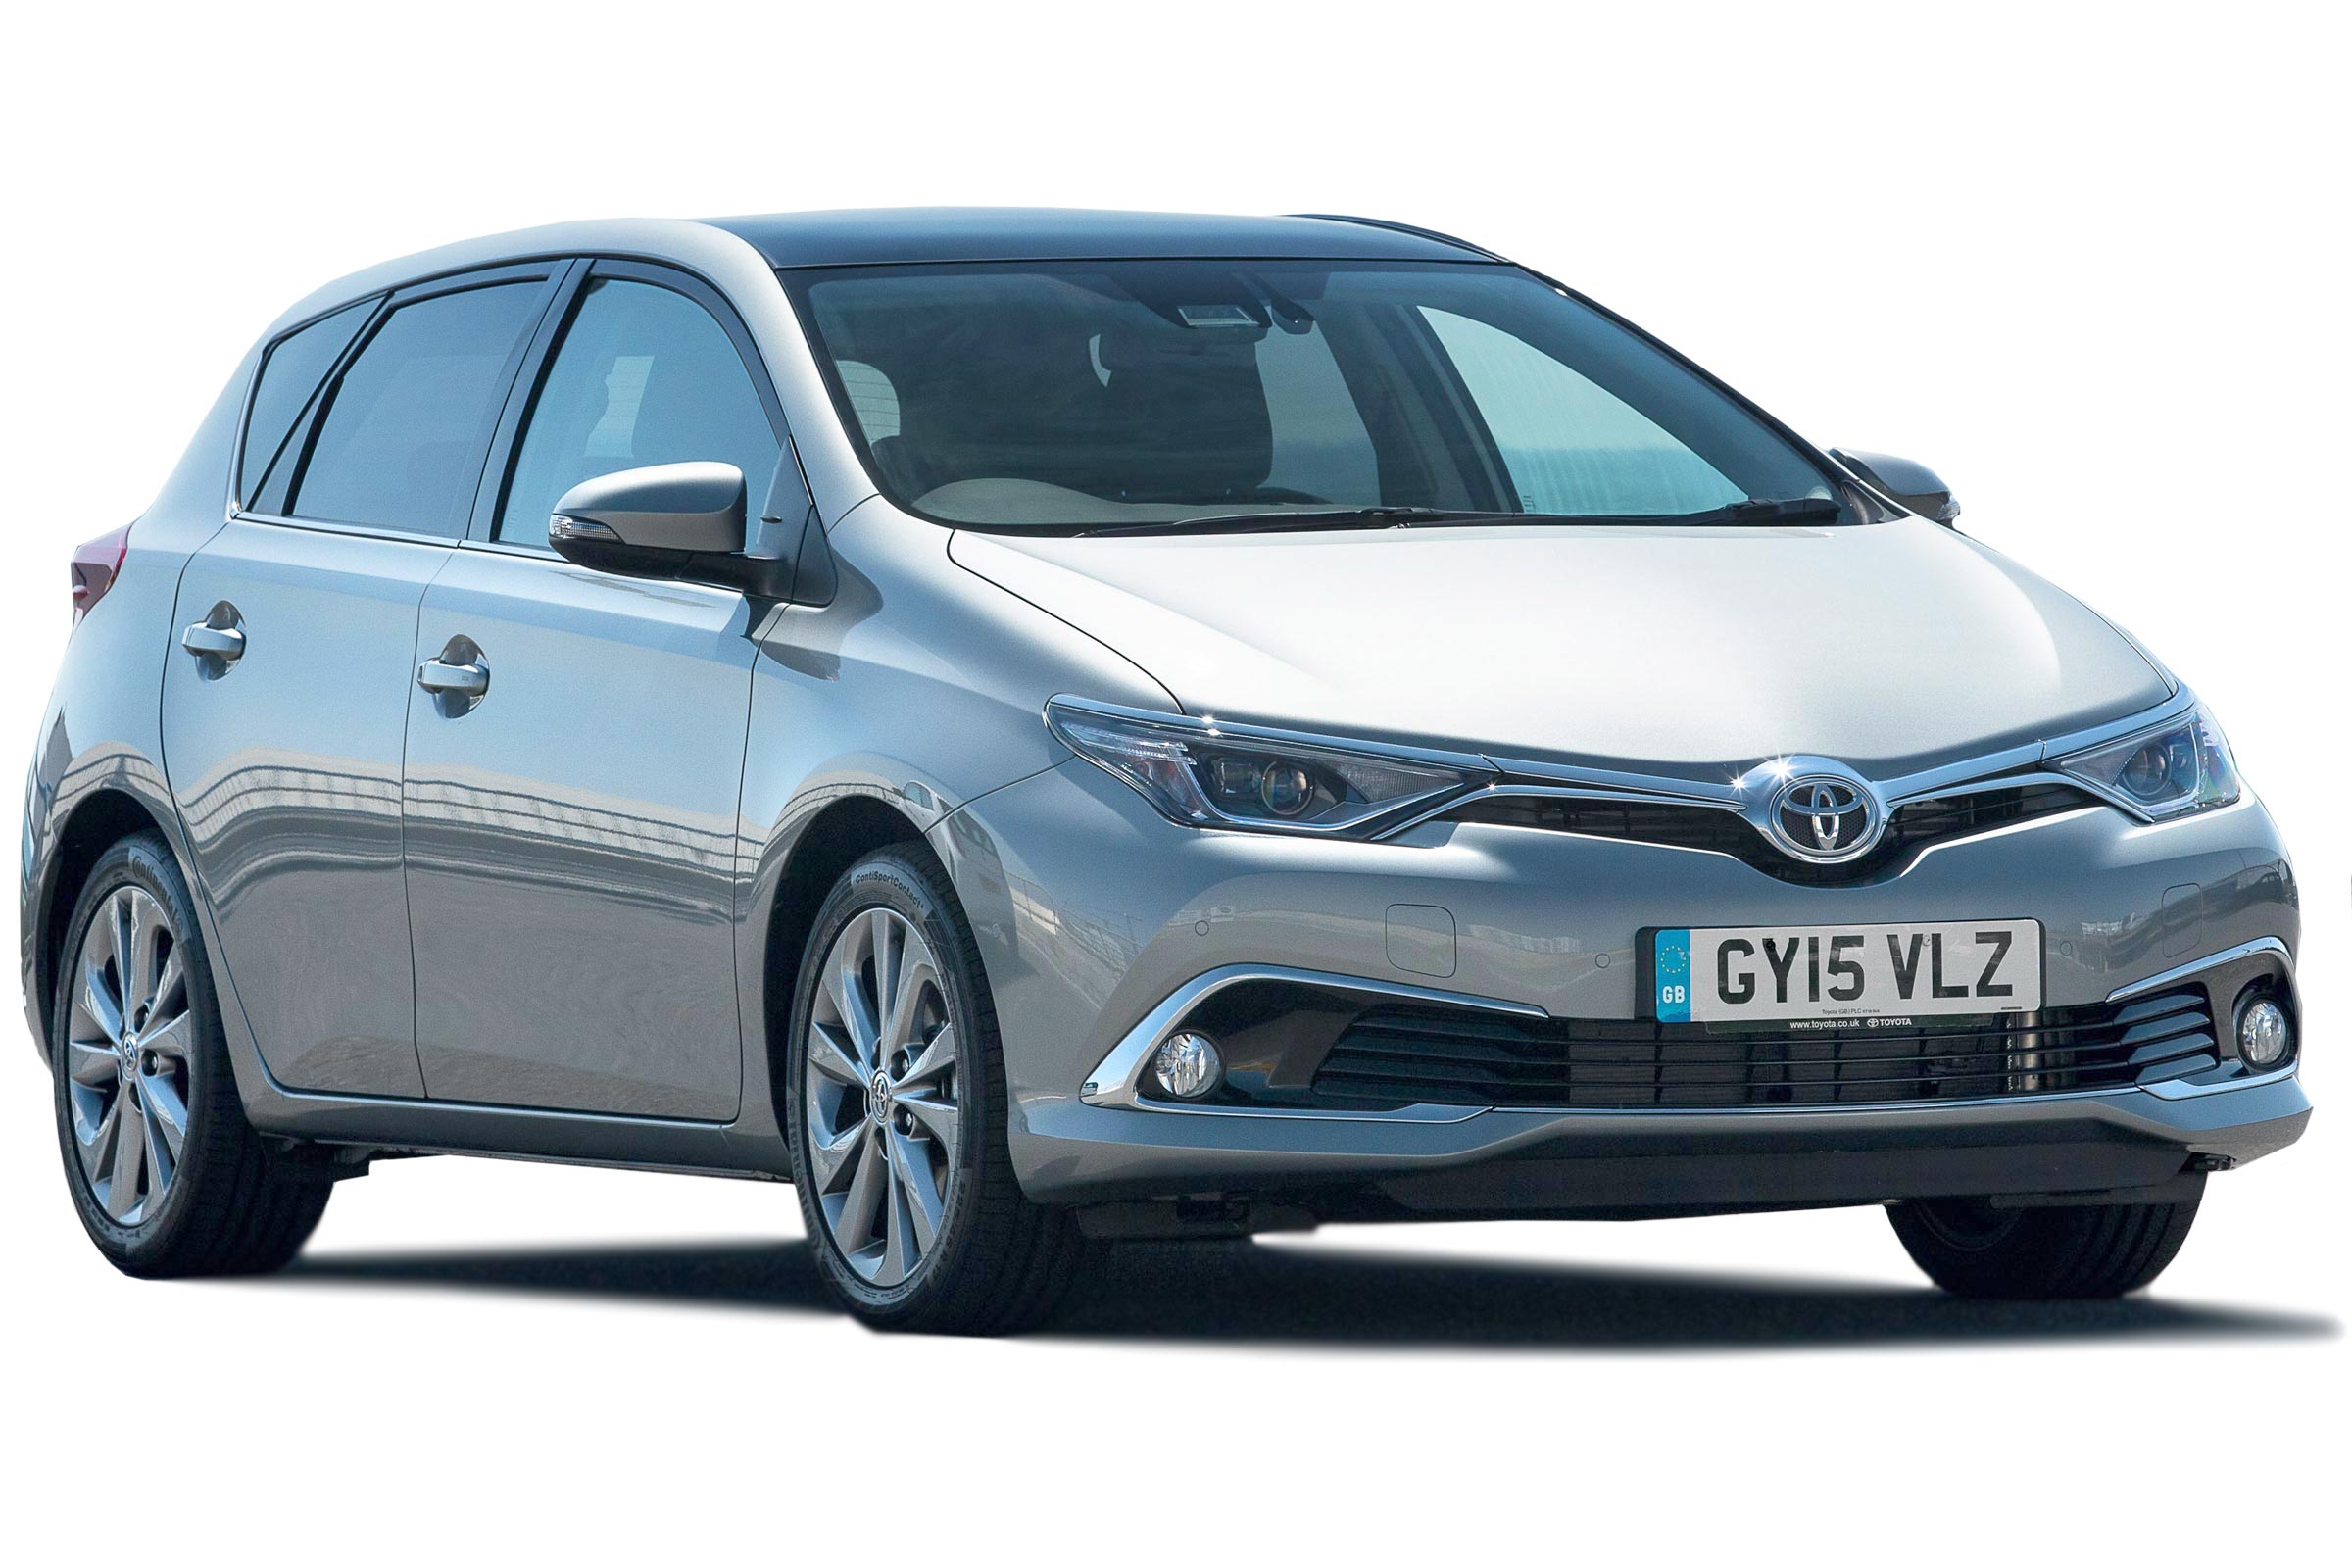 https://mediacloud.carbuyer.co.uk/image/private/s--zwiuws3r--/v1584464033/carbuyer/car_images/toyota-auris.jpg